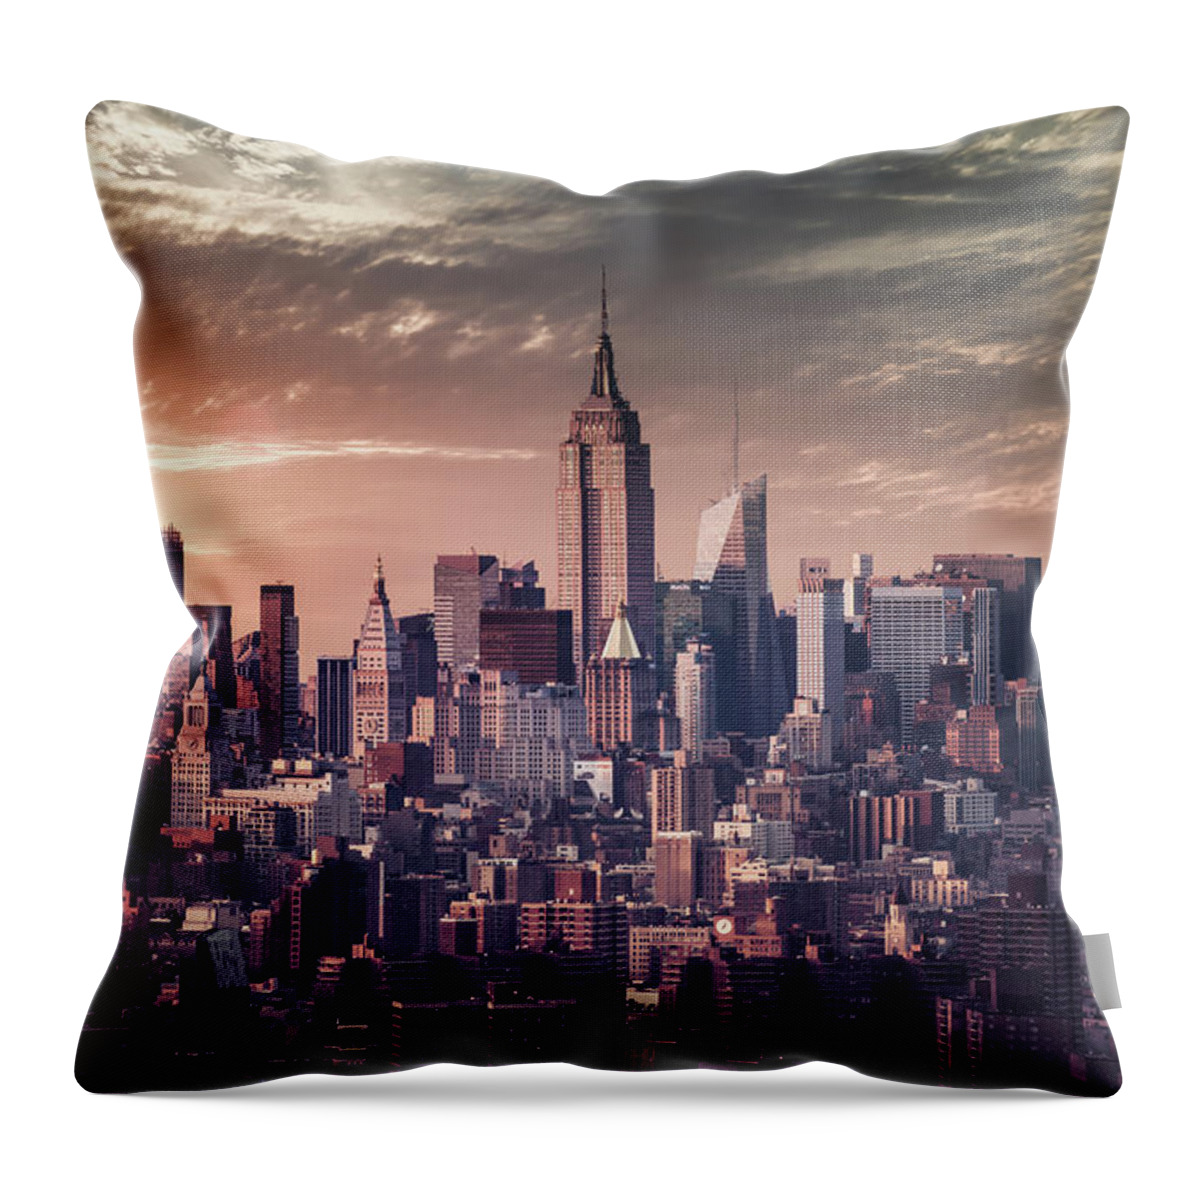 Outdoors Throw Pillow featuring the photograph Concrete Paradise by Aleks Ivic Visuals